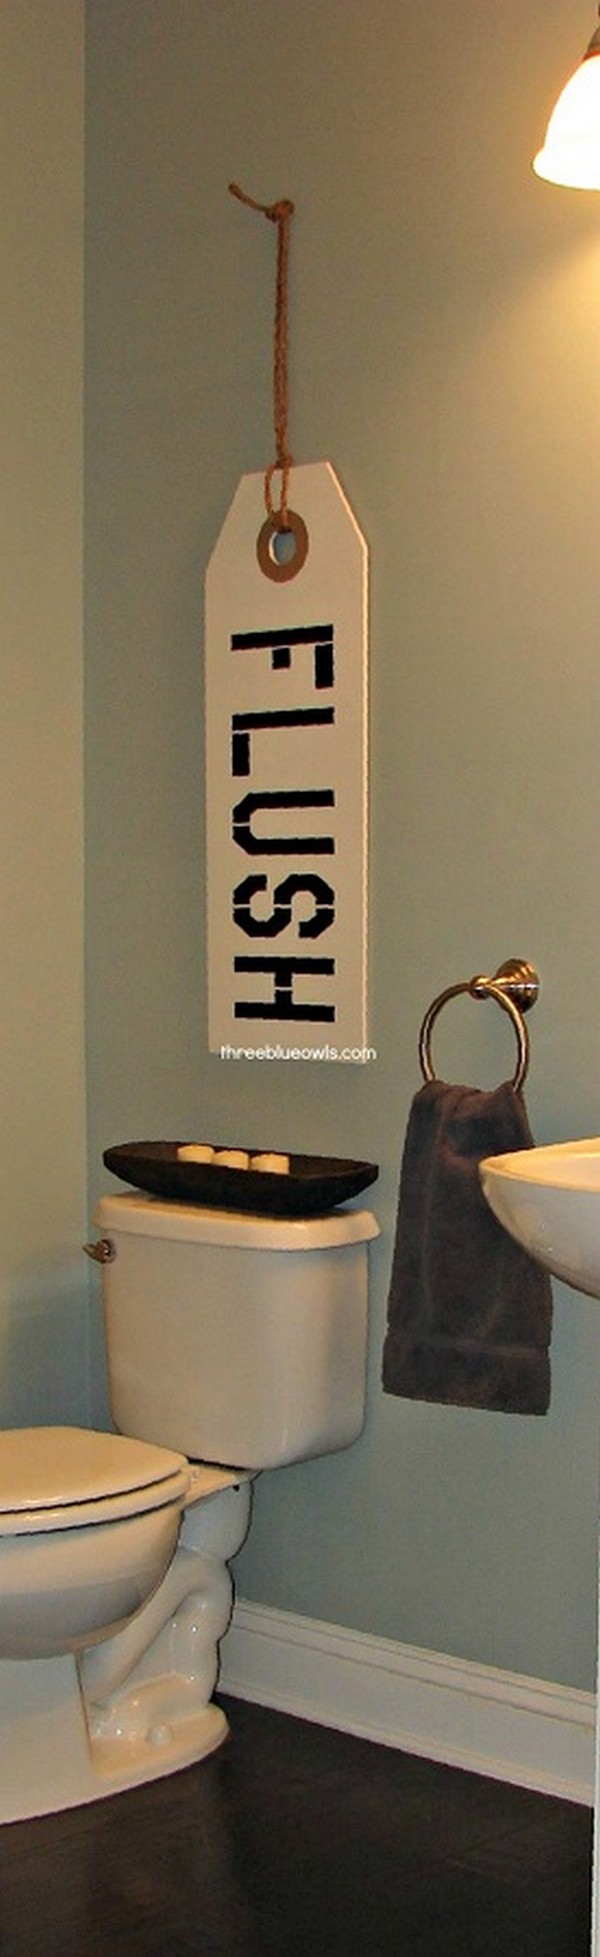 There is no excuse for forgetting to flush now!